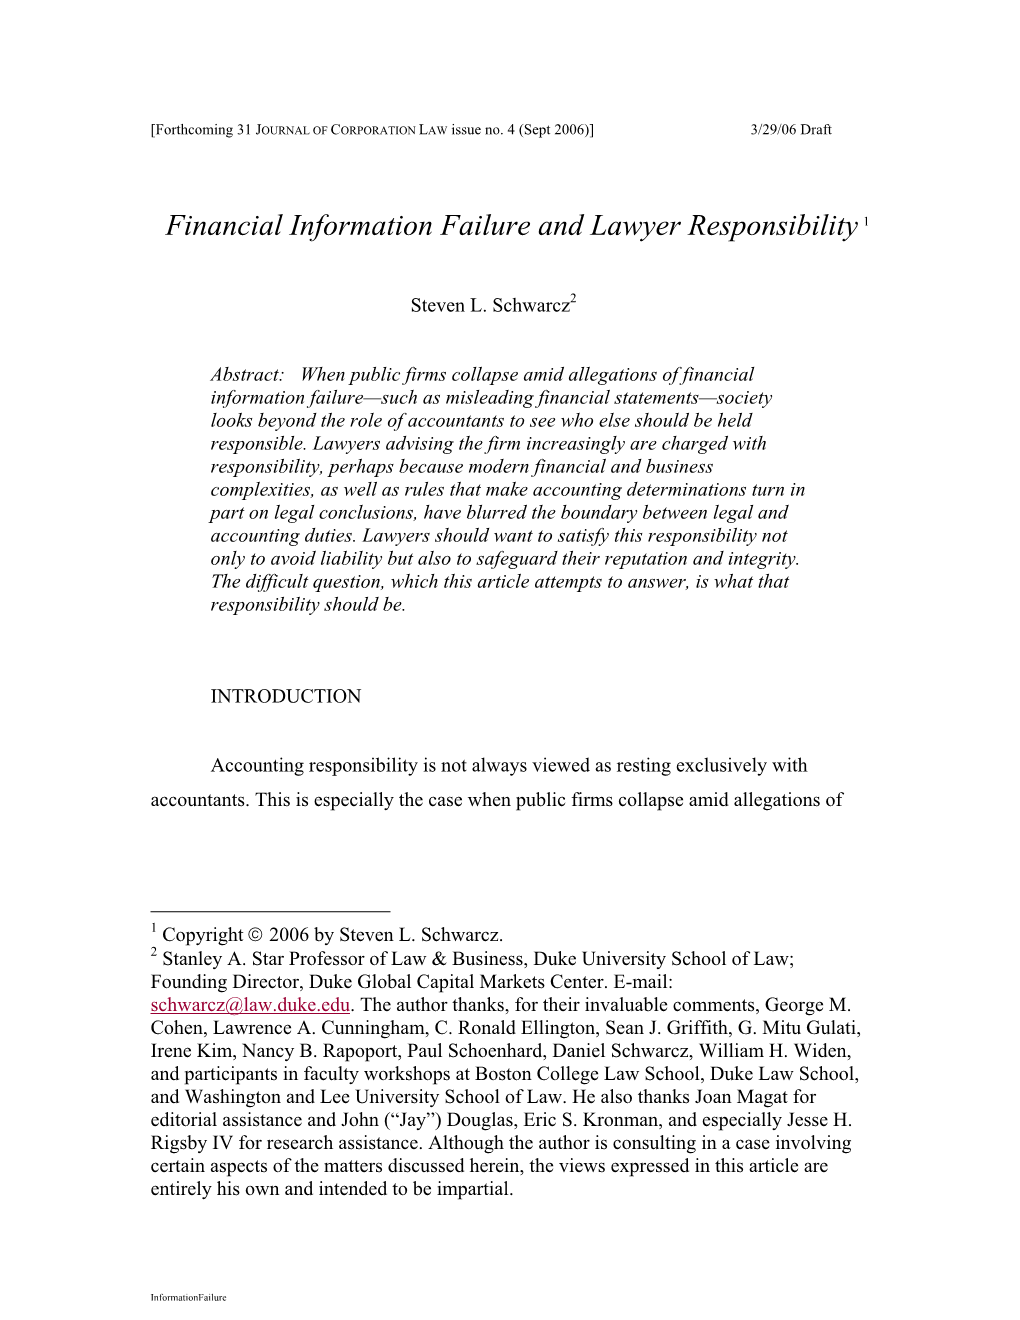 Financial Information Failure and Lawyer Responsibility 1